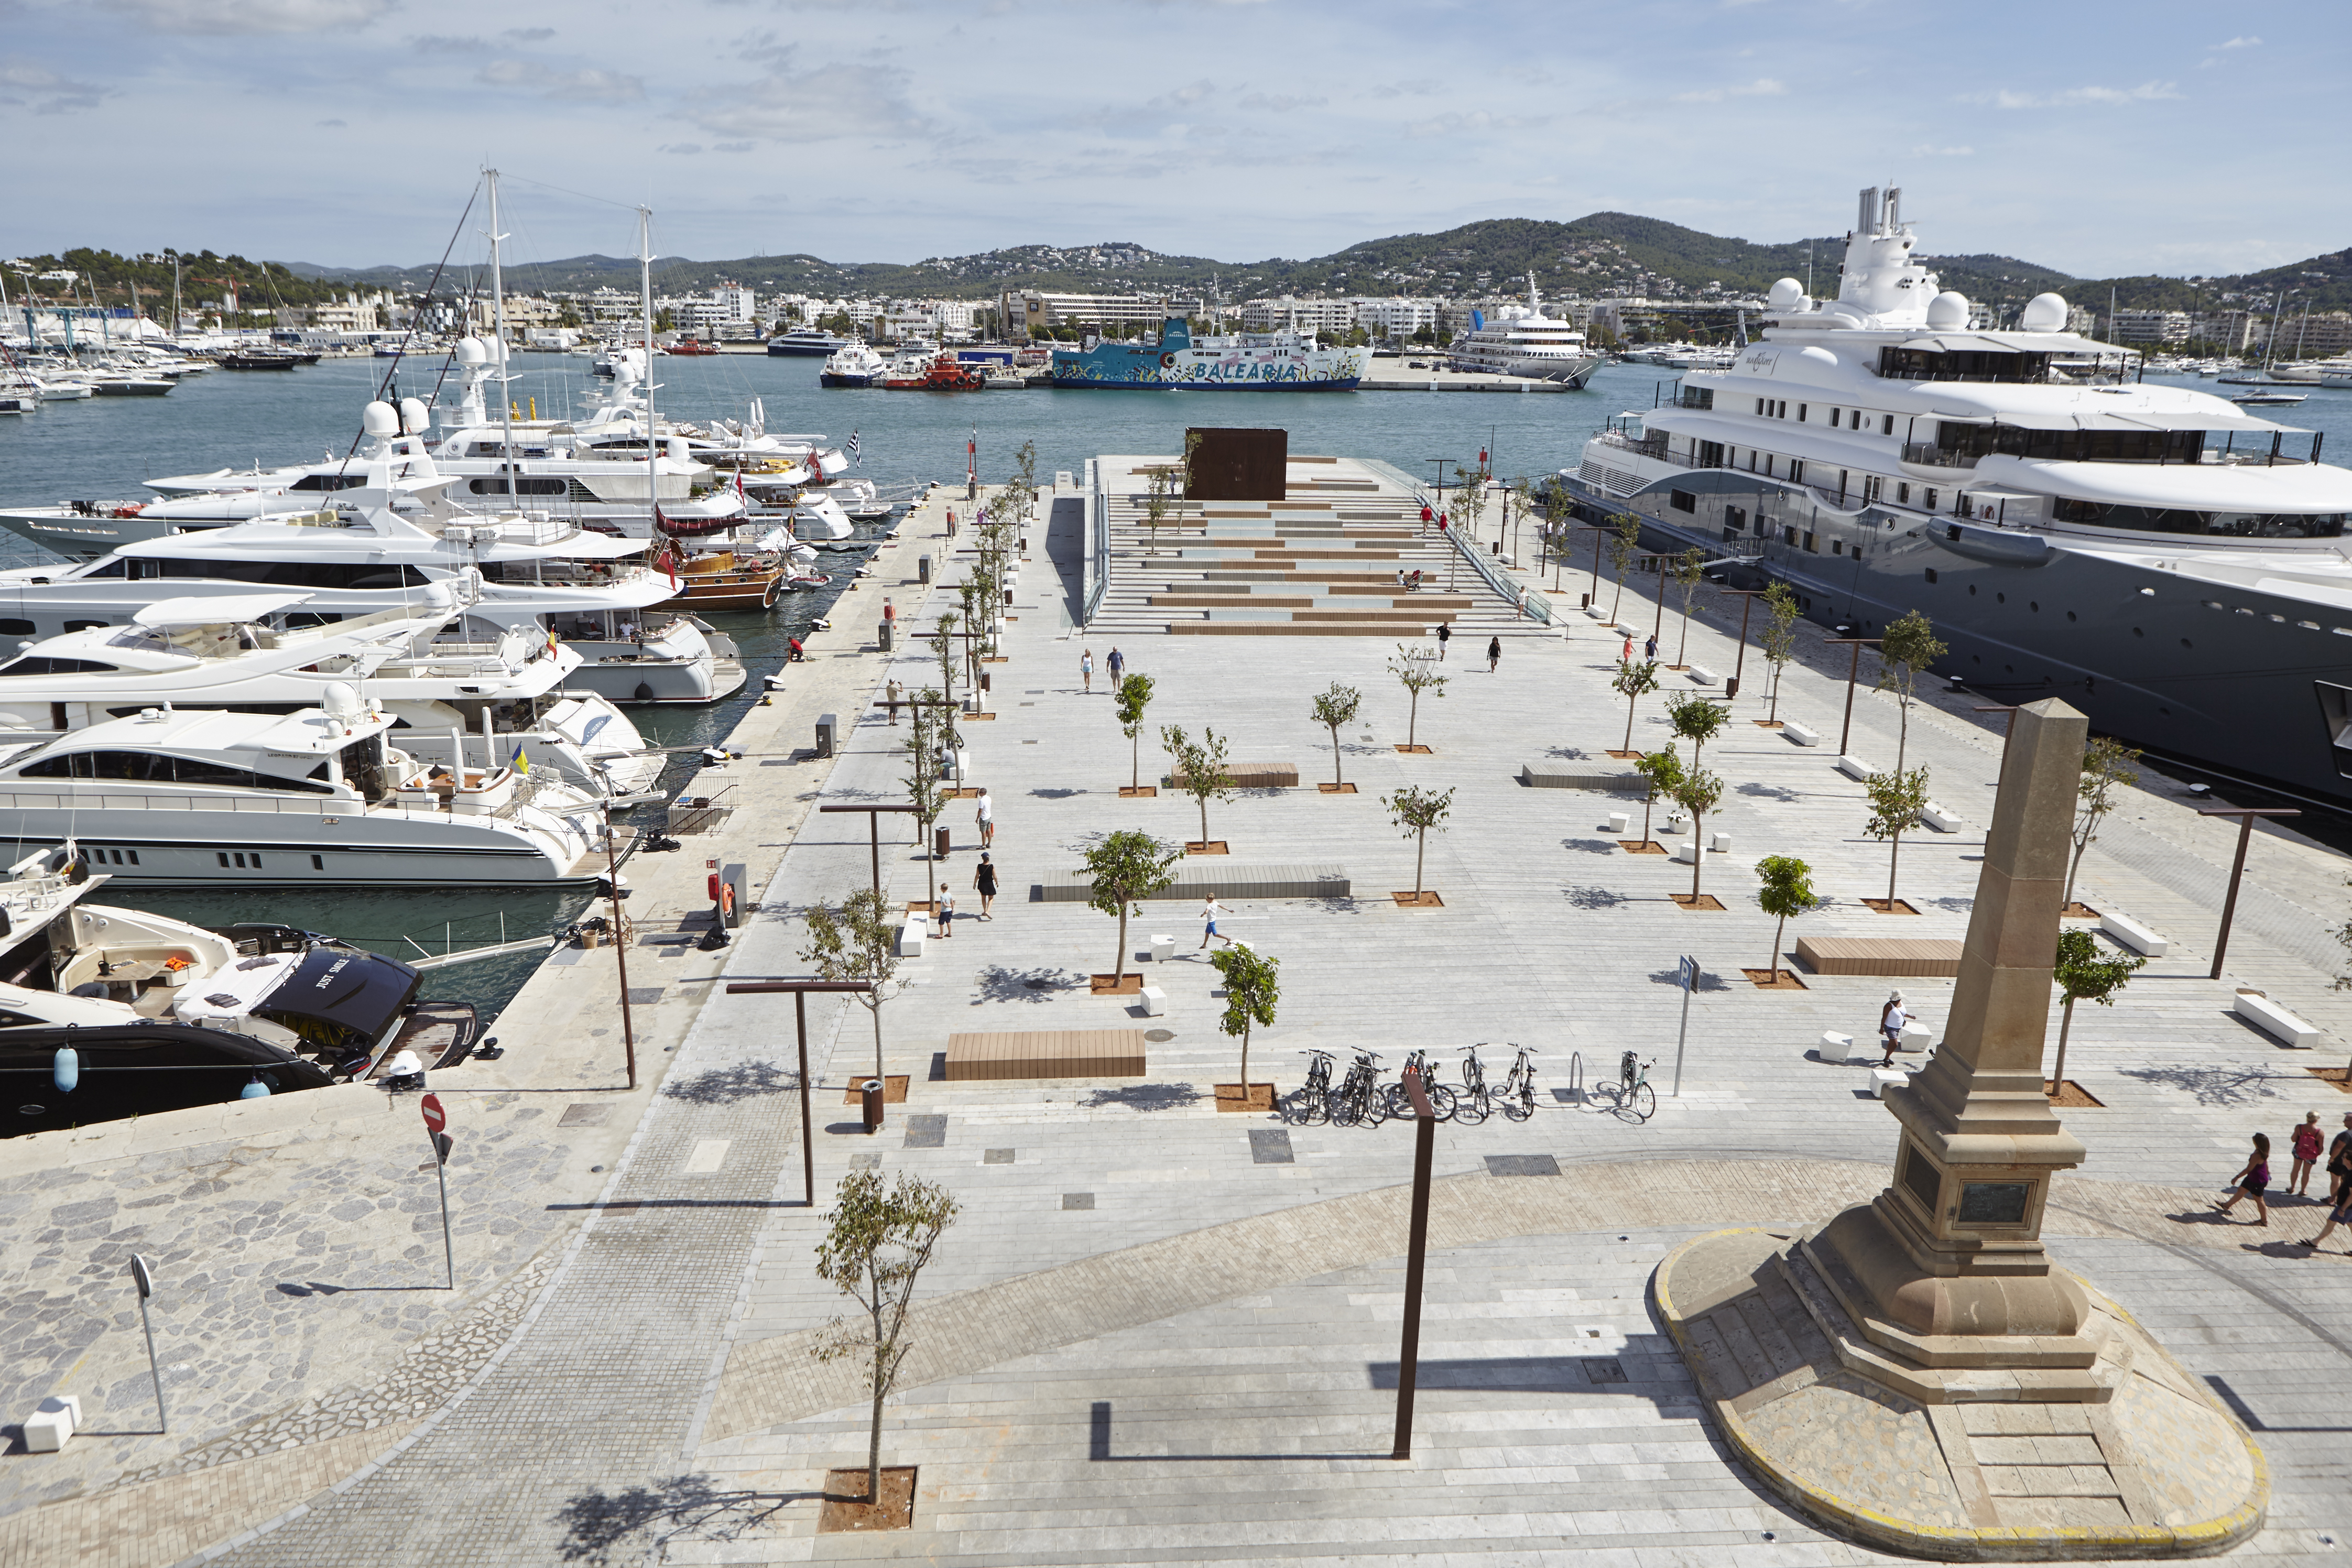 The APB awards Igy Gestora Marinas Spain the management of the moorings for large vessels in the Levante basin of the port of Eivissa